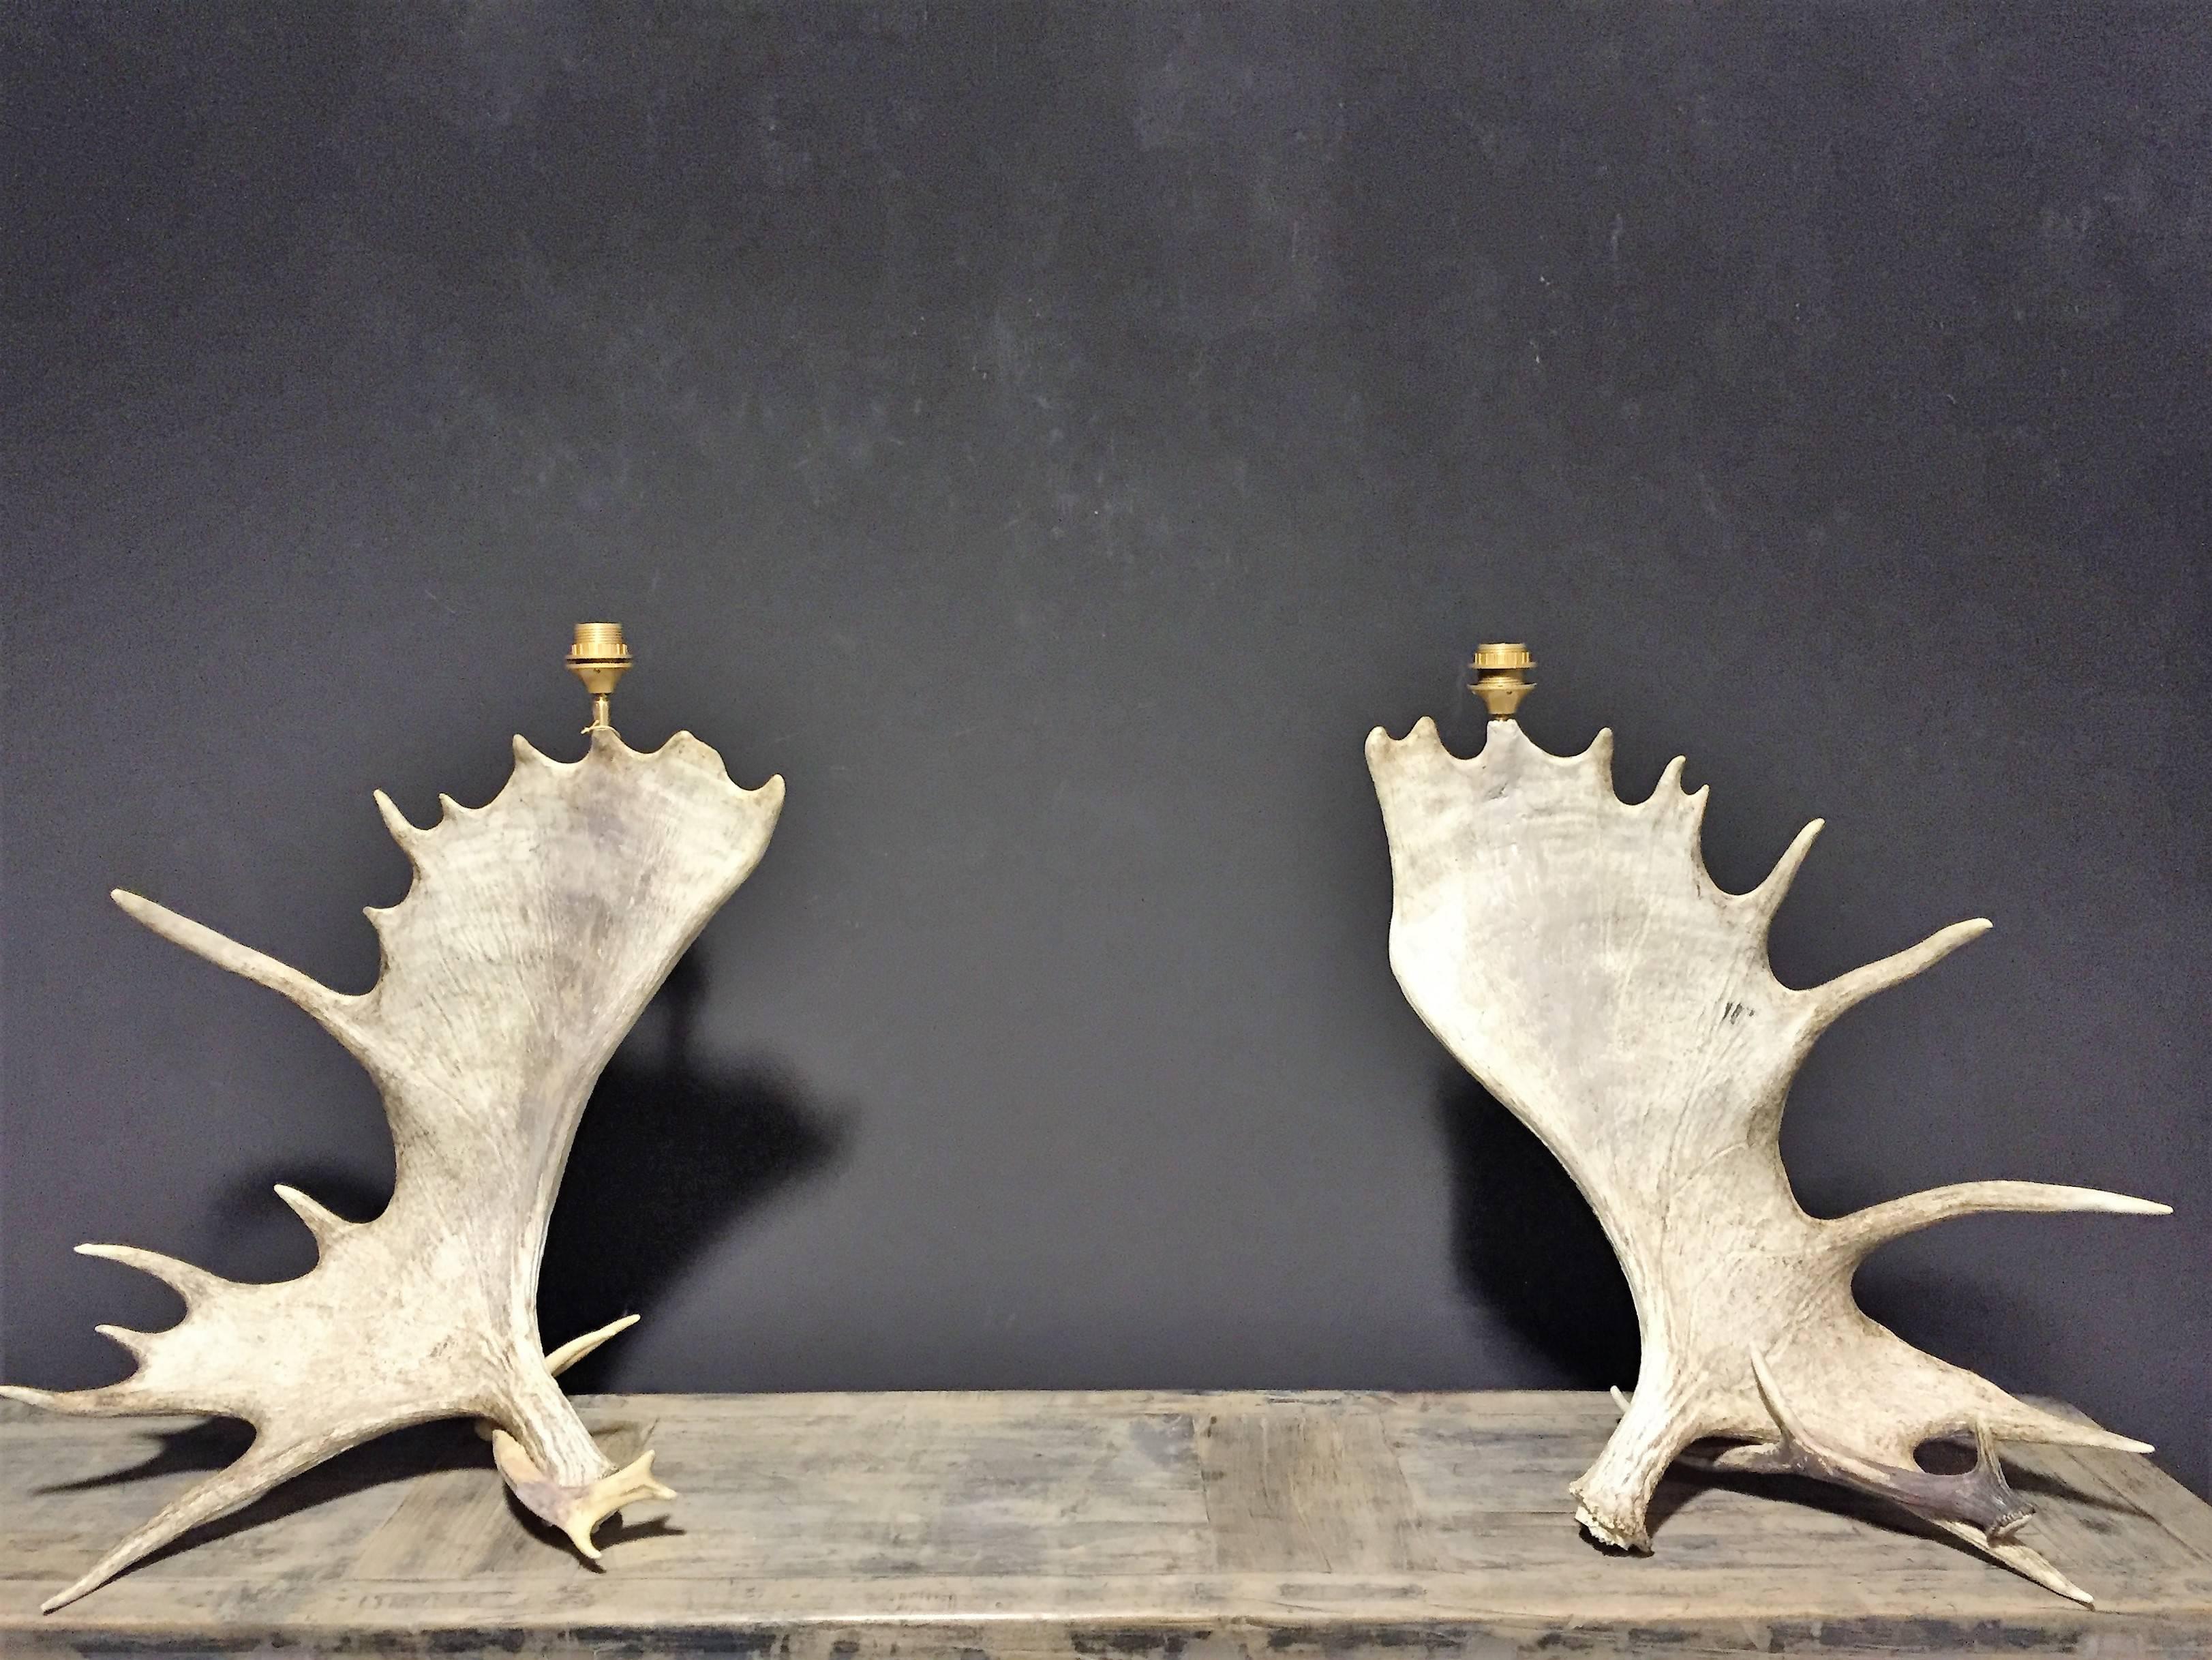 Very unique lamps made of a heavy pair of Canadian moose antlers. The wires are not visible they are inside the antler.